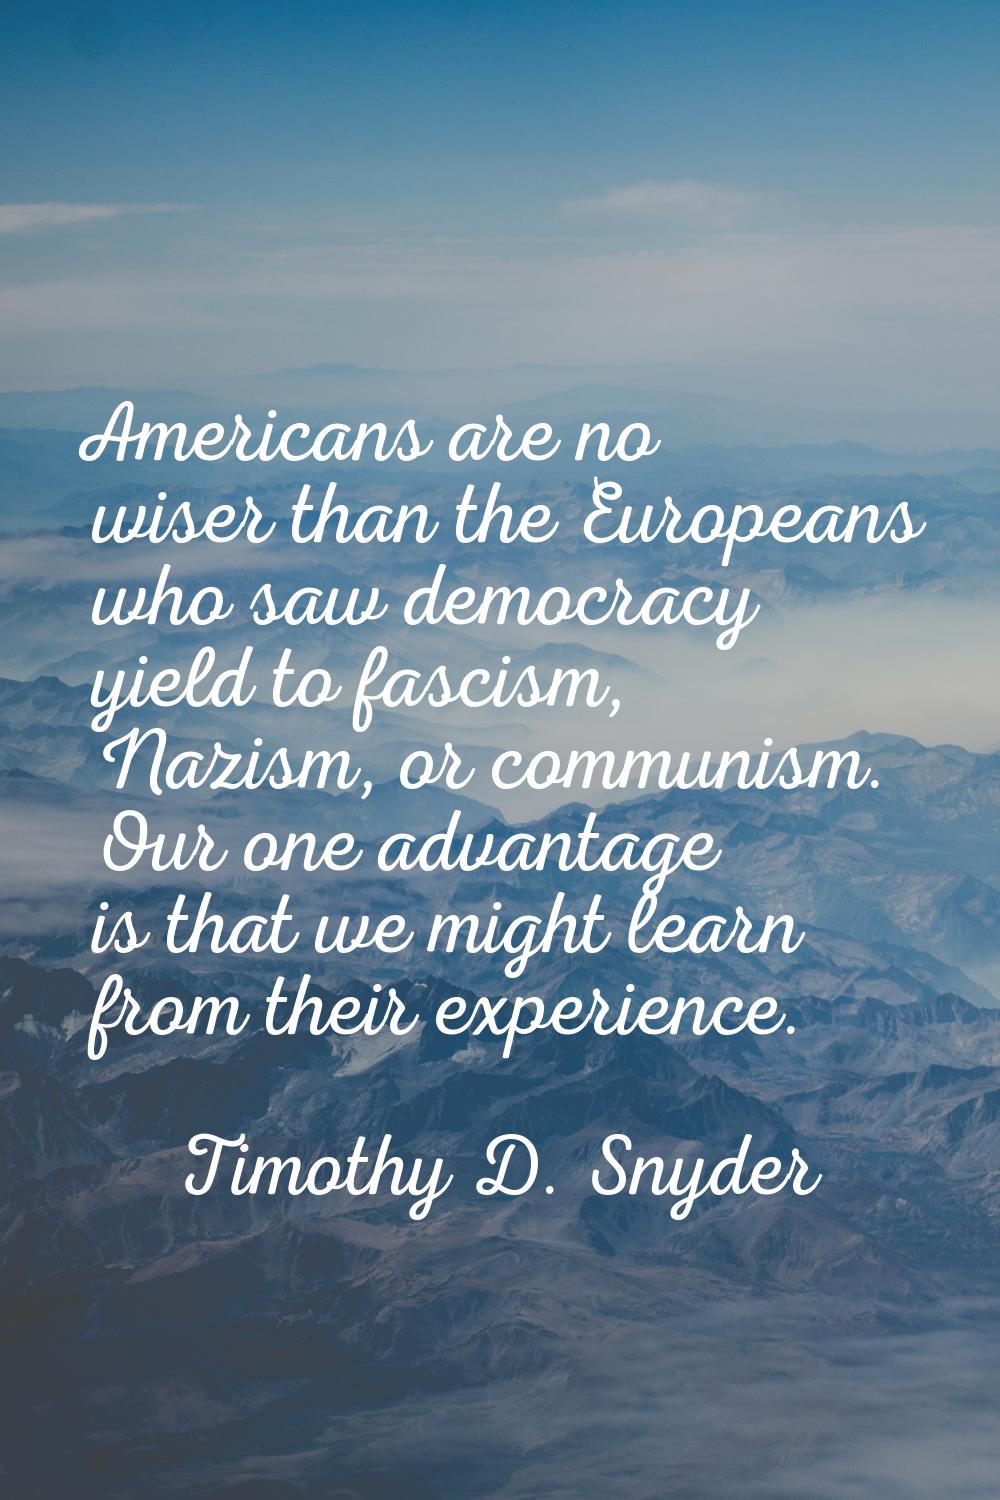 Americans are no wiser than the Europeans who saw democracy yield to fascism, Nazism, or communism.